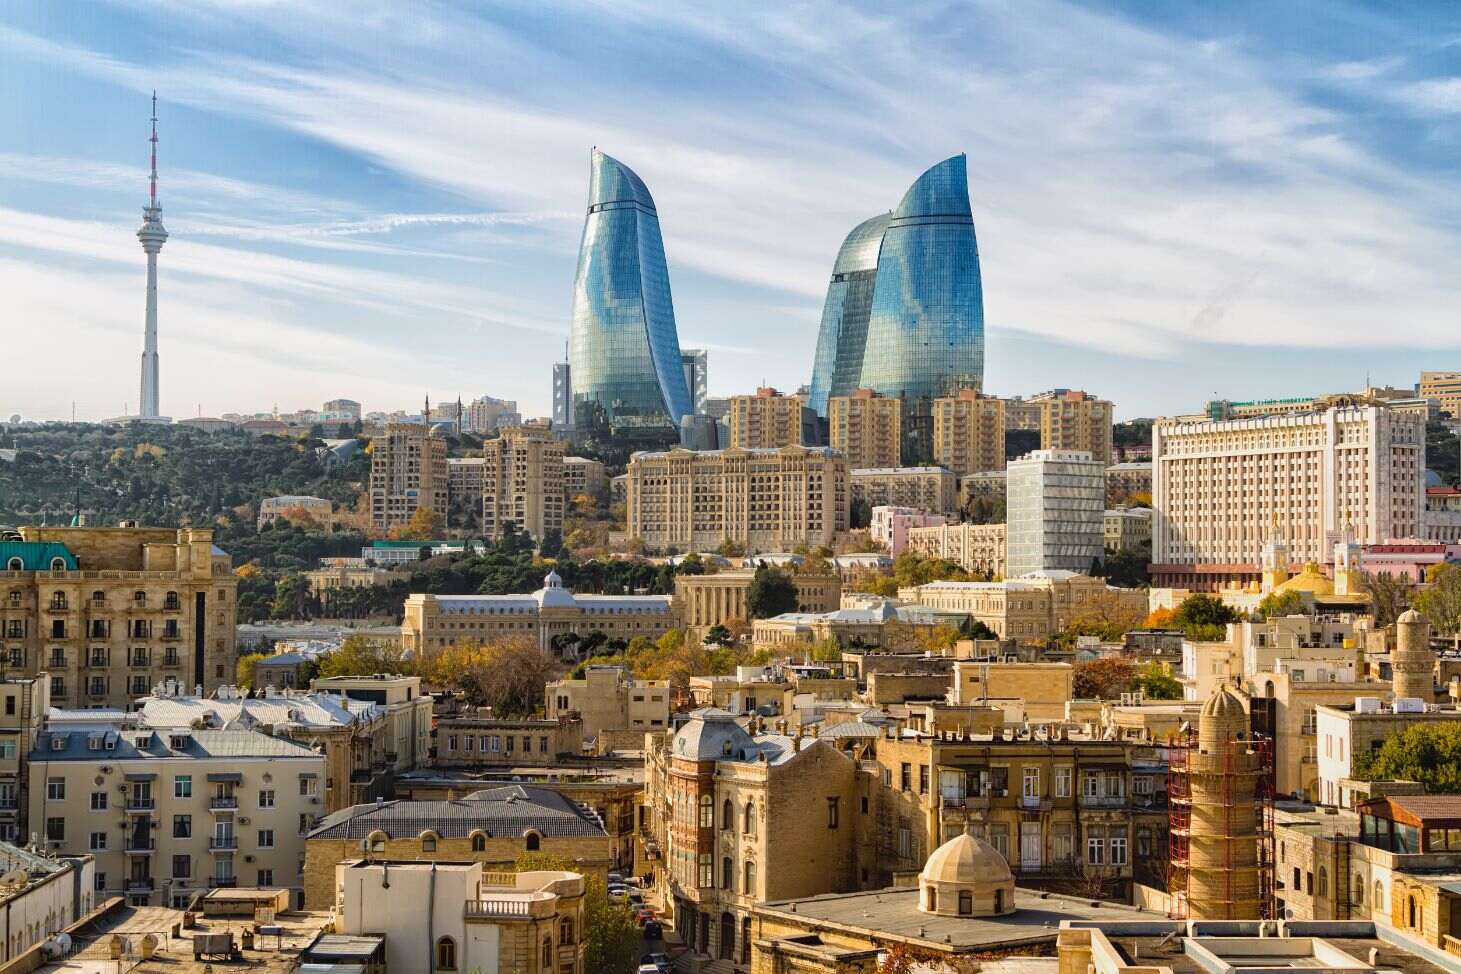 DAY 4: DEPARTURE FROM BAKU